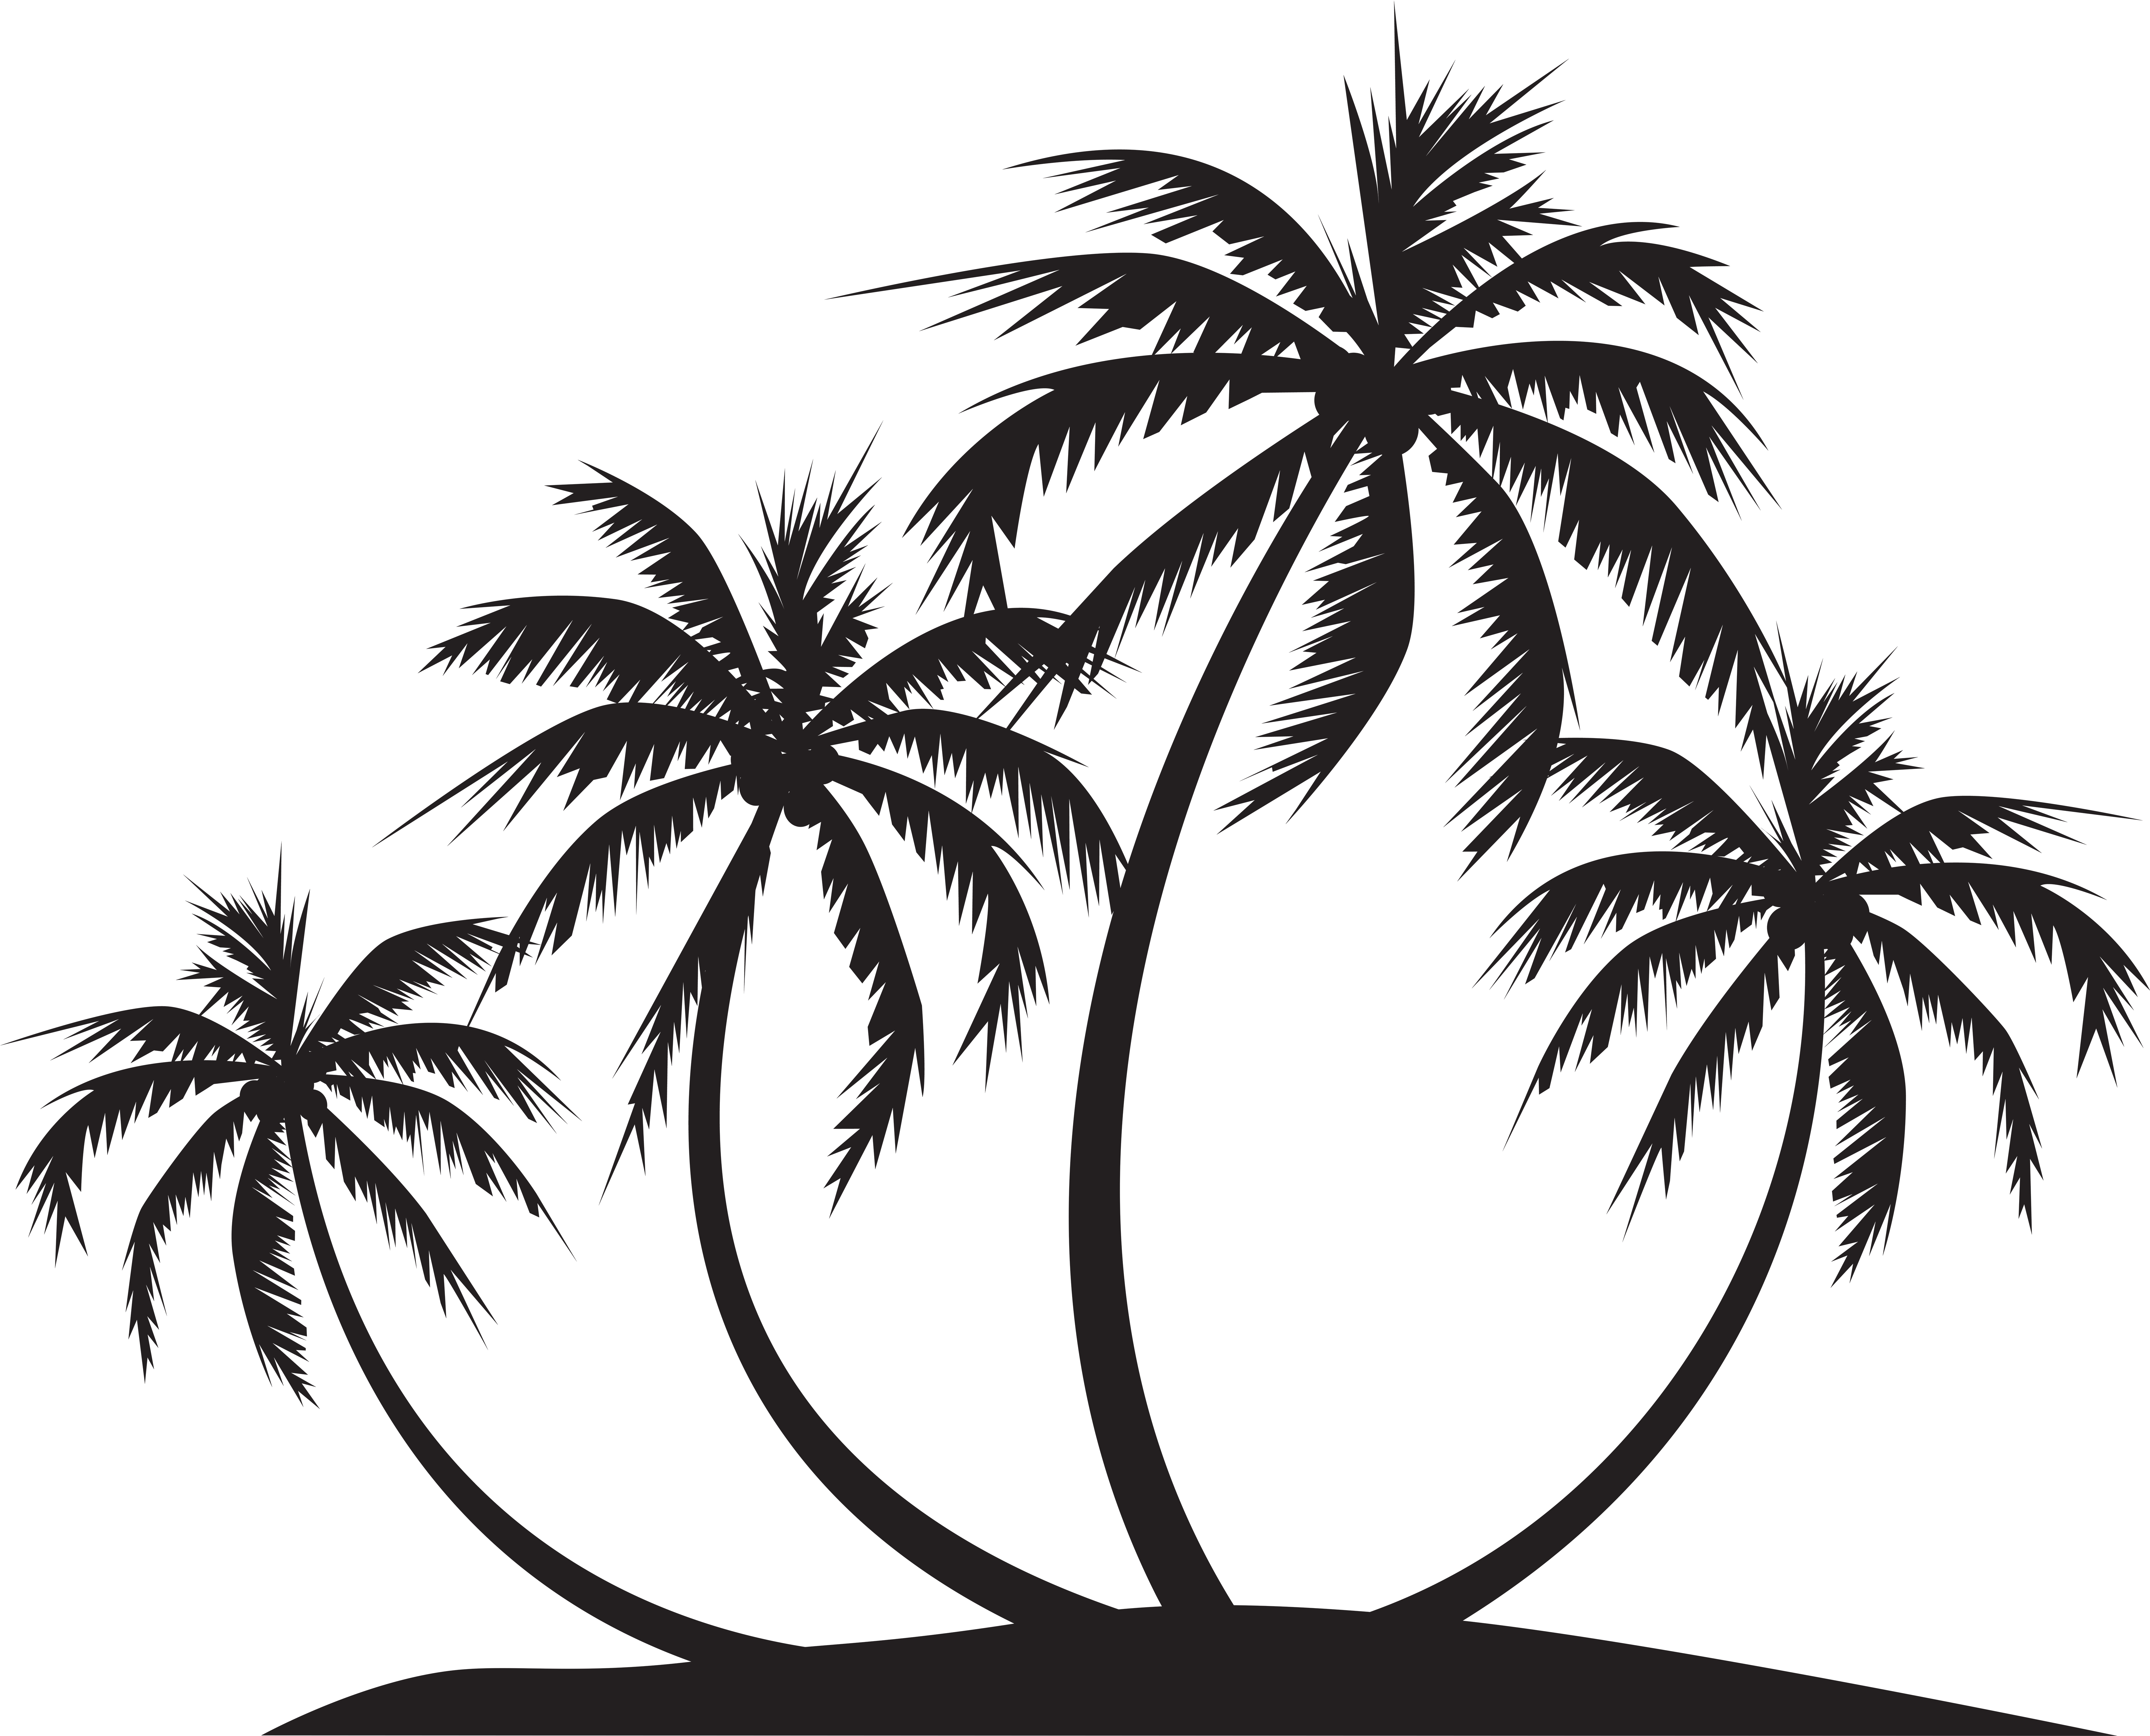 Download and share clipart about Palm Island Silhouette Png Clip Art - Palm...